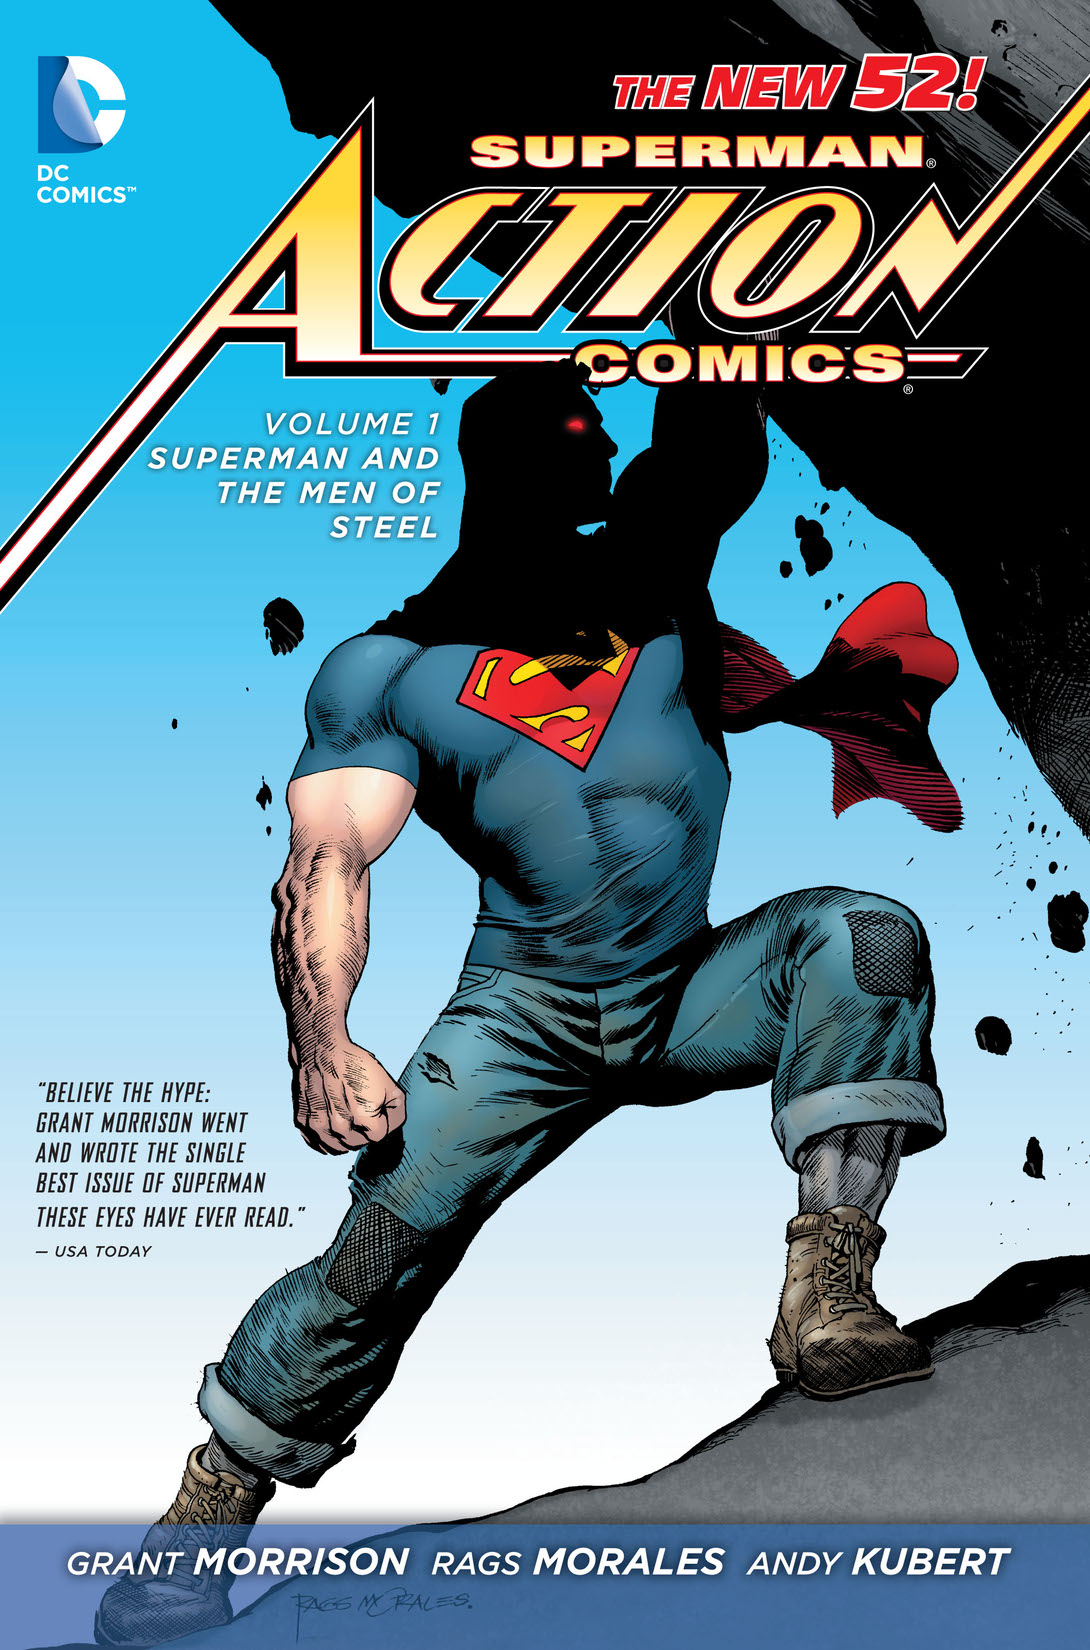 Superman - Action Comics Vol. 1: Superman and the Men of Steel preview images